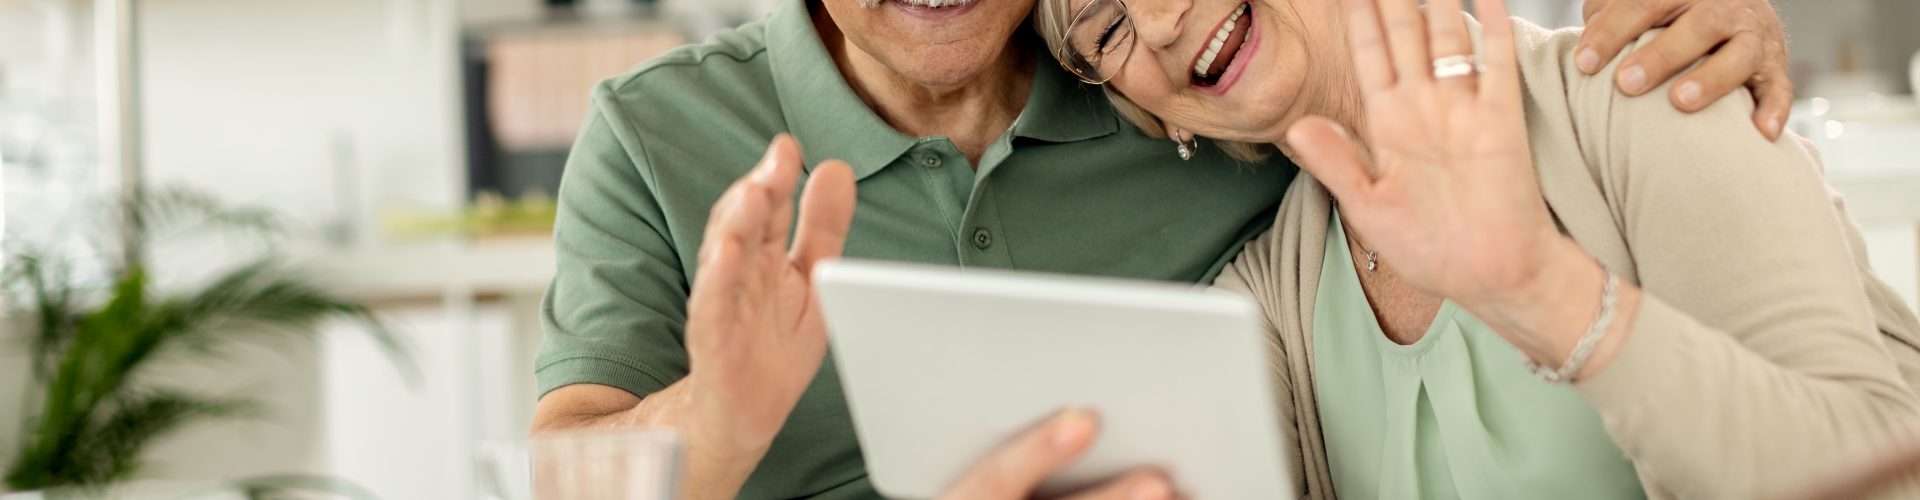 Happy,Senior,Couple,Using,Touchpad,And,Waving,While,Greeting,Someone